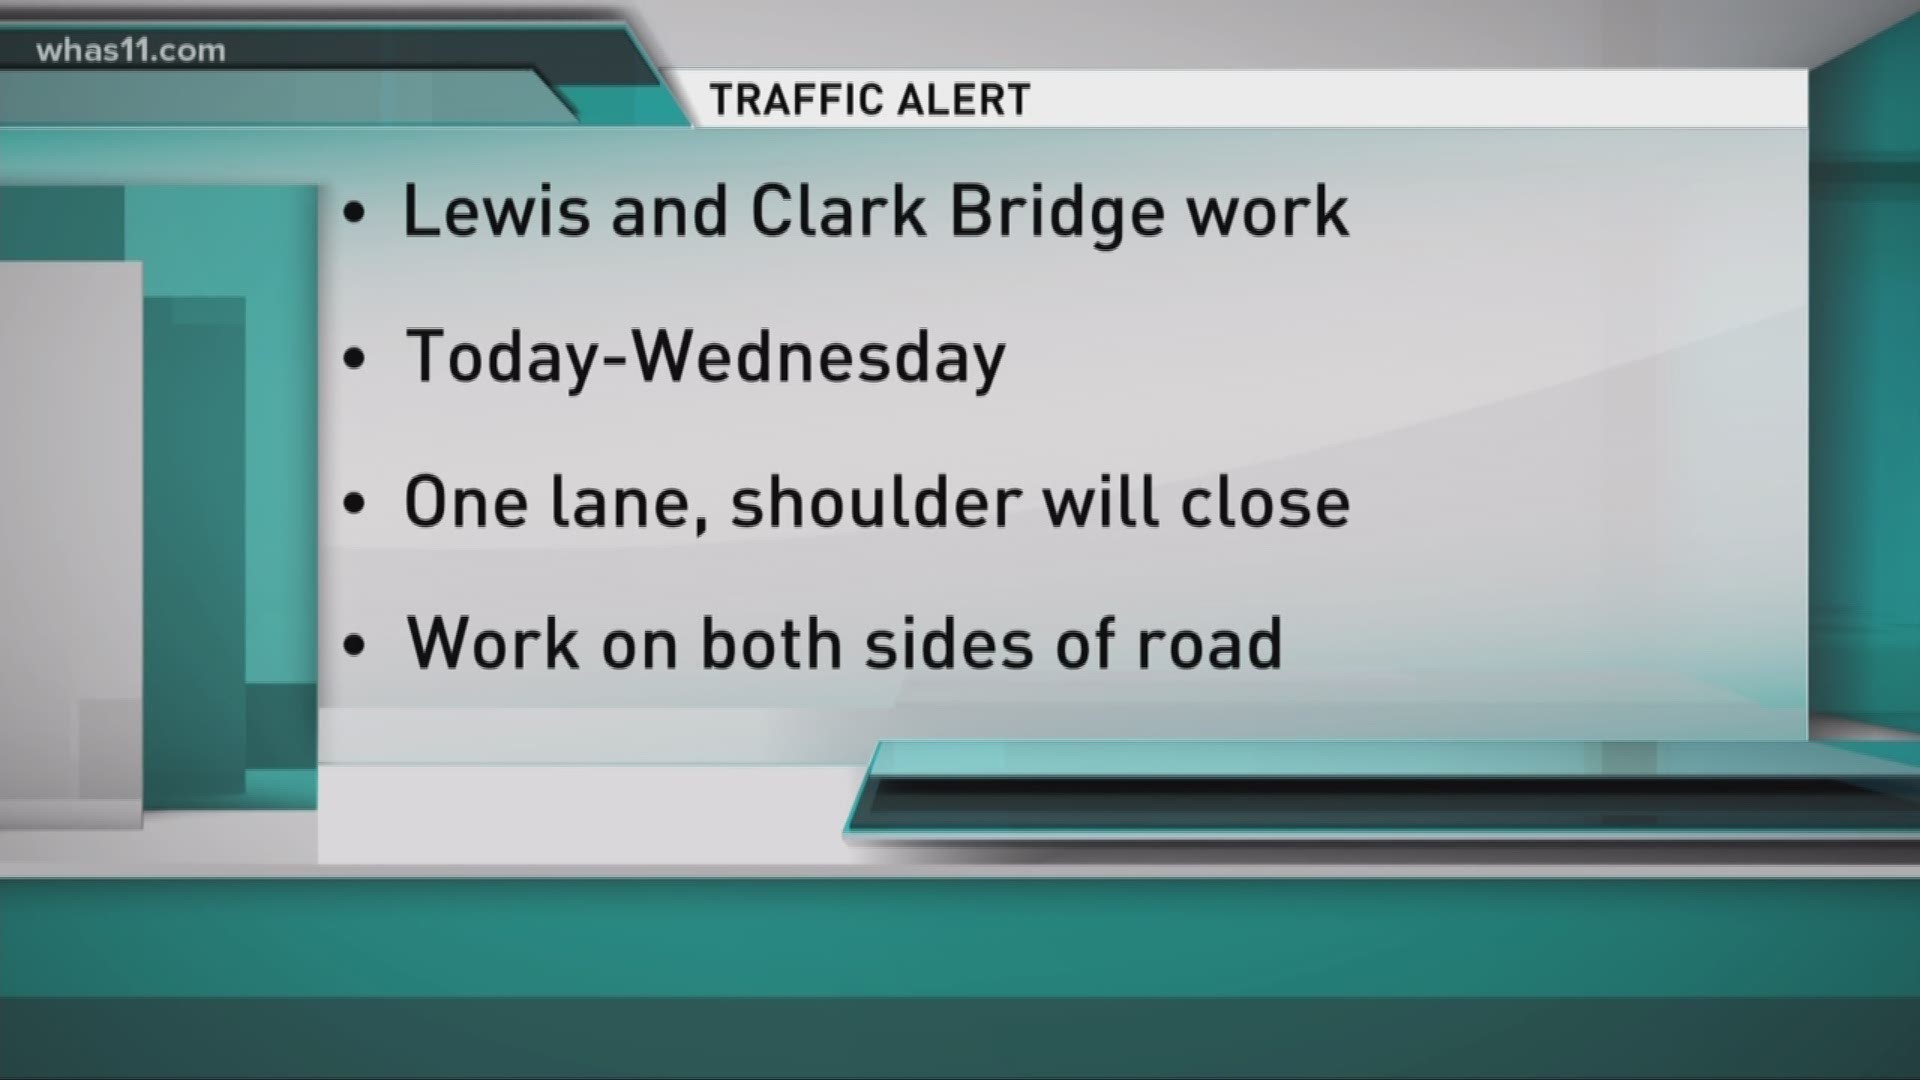 Starting Monday, one lane and the shoulder of the Lewis and Clark Bridge will be closed for maintenance as crews clean drains and bridge joints.